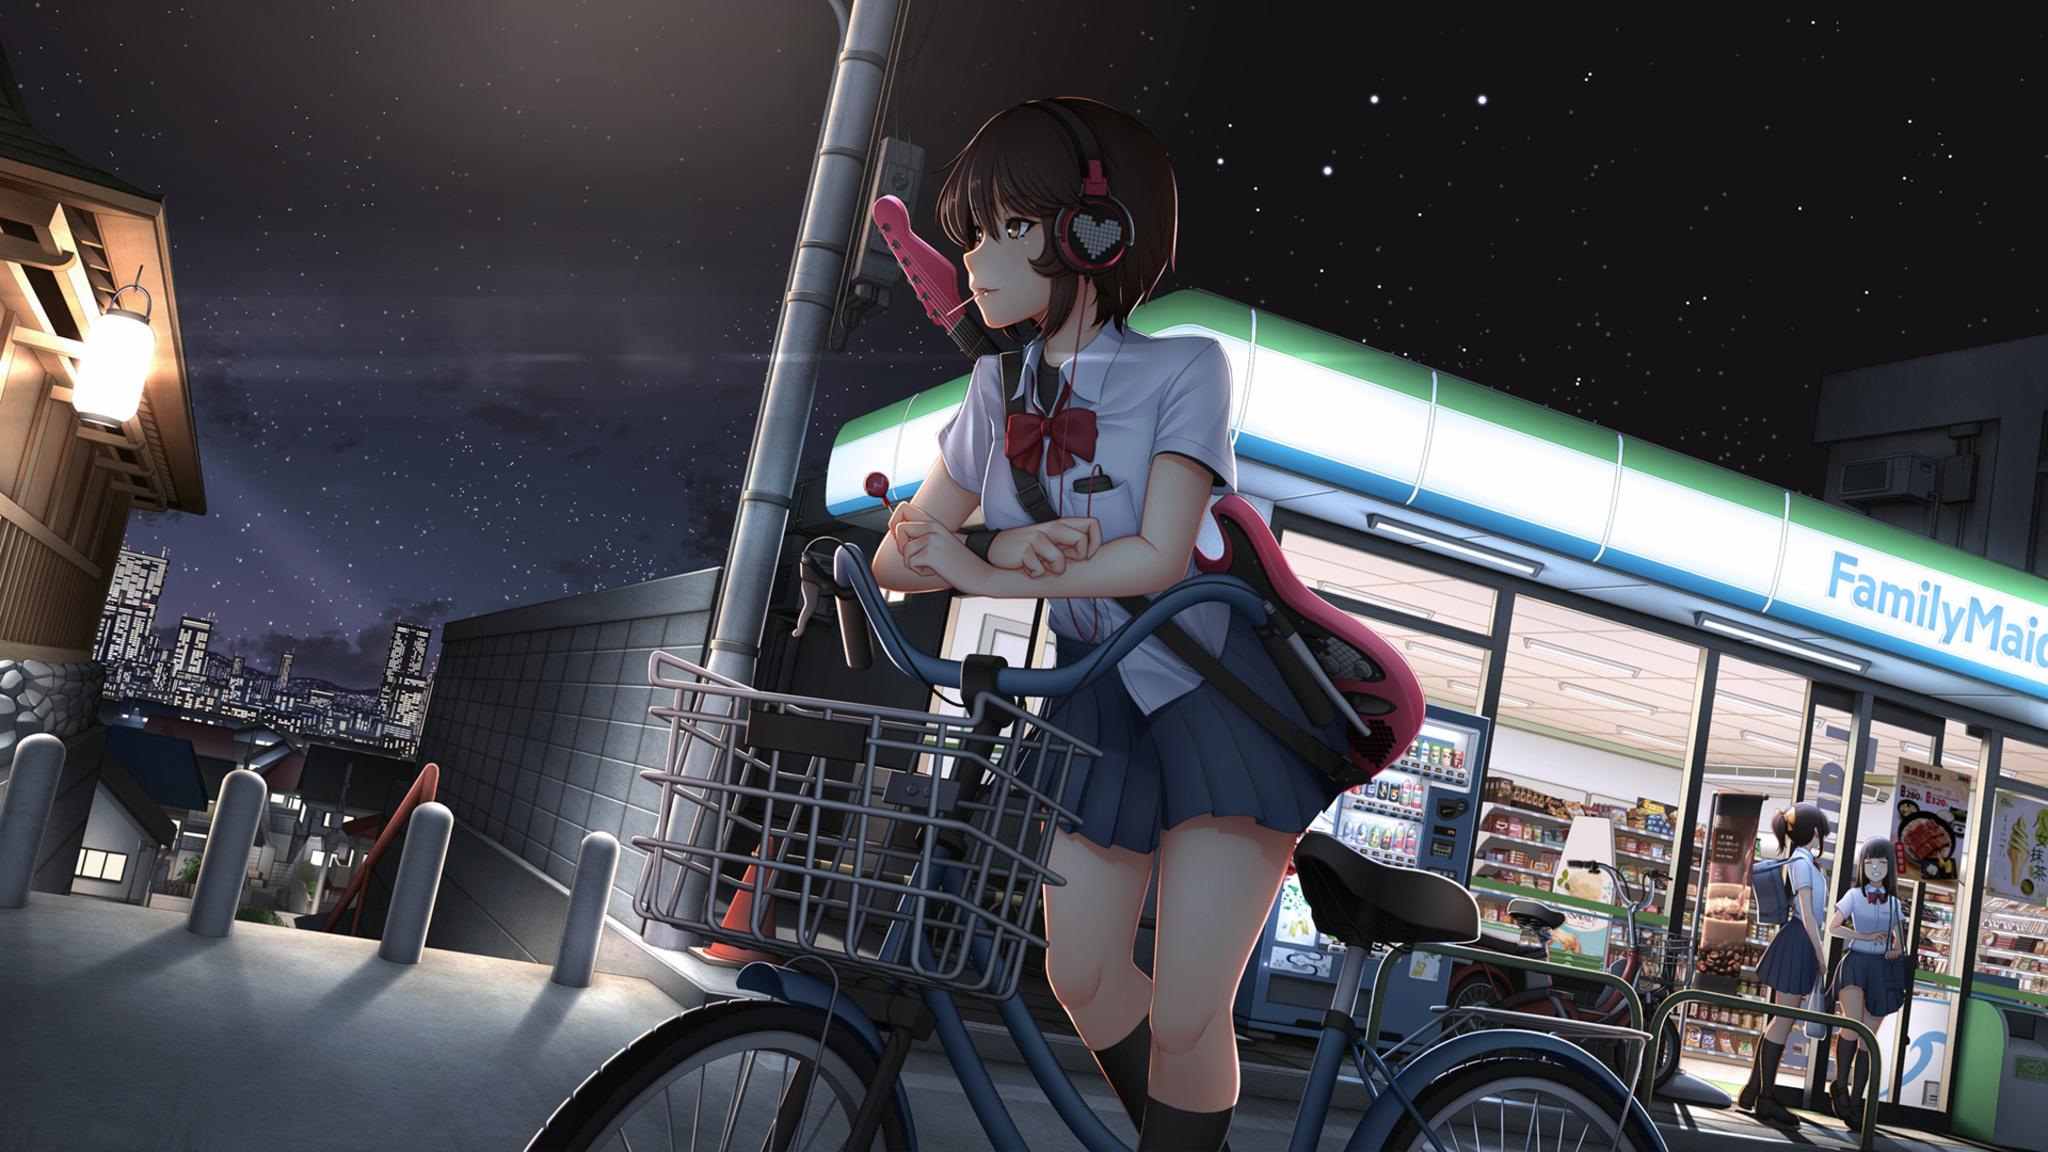 2048x1152 Cute Anime Girl With Bicycle Listening Music On